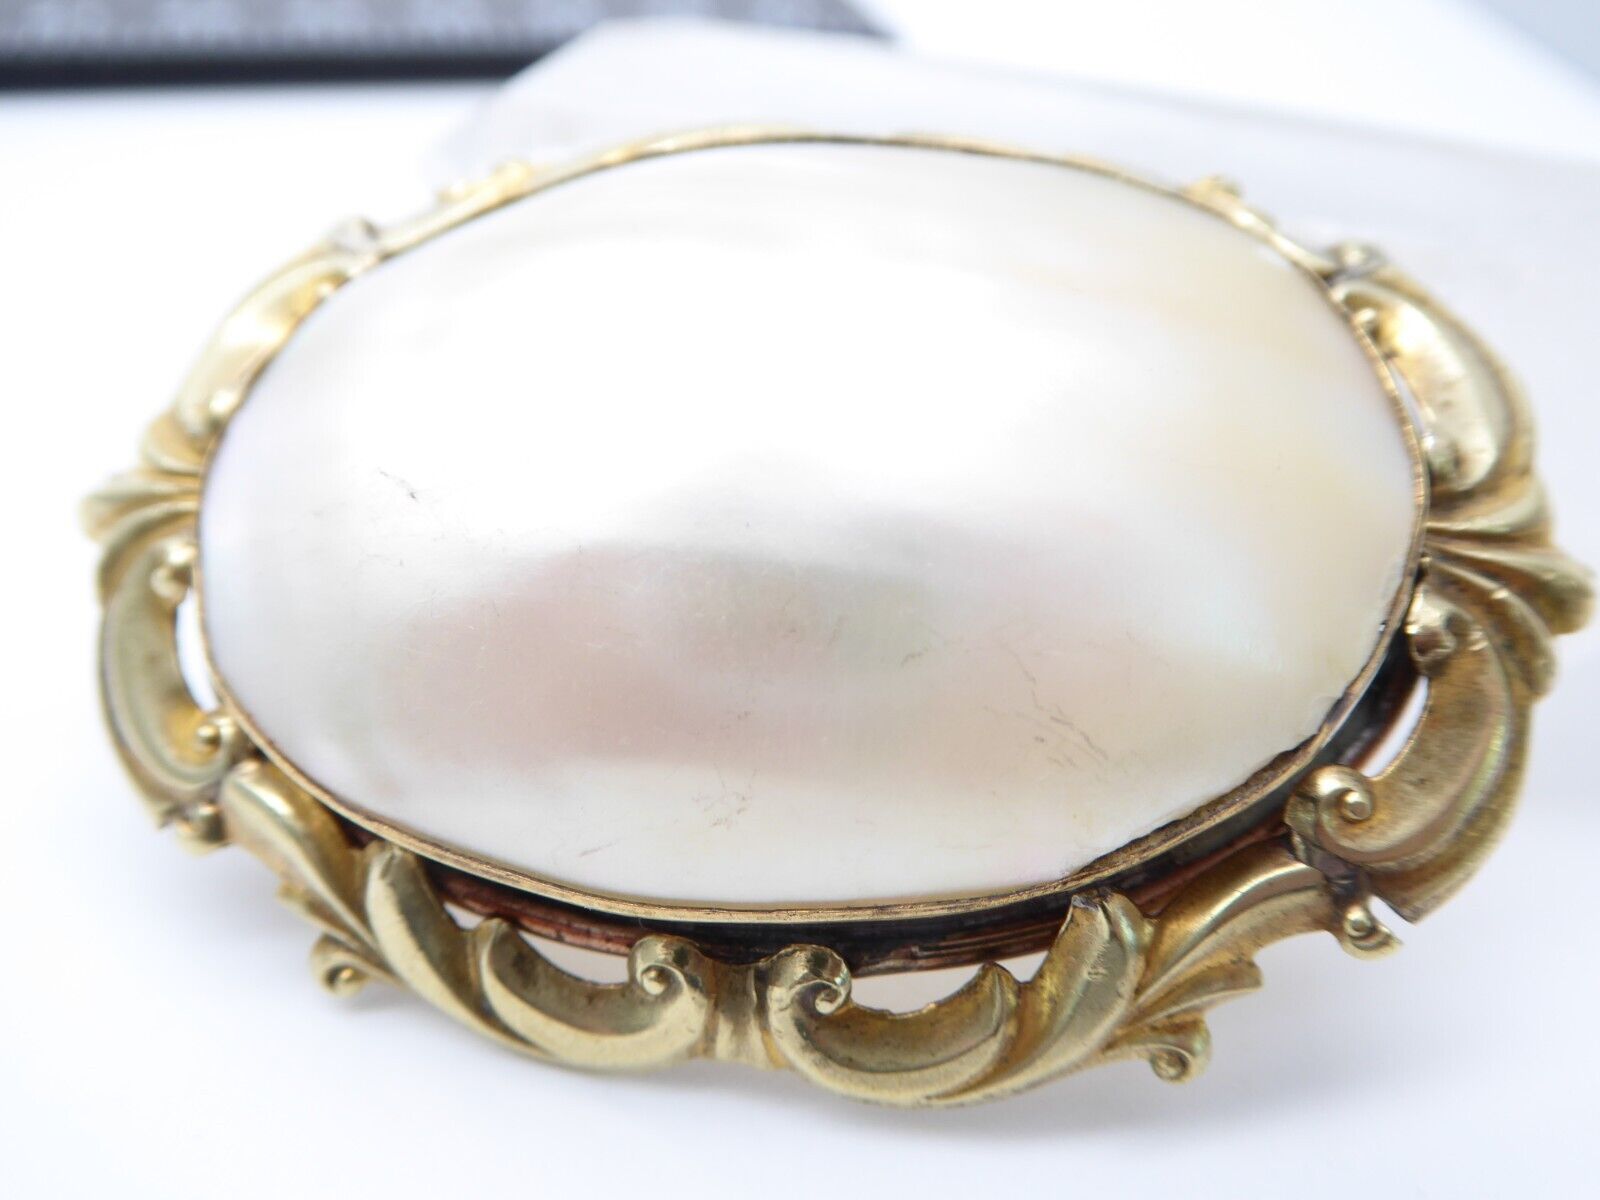 Antique Victorian Gold Tone Mother of Pearl Brooch